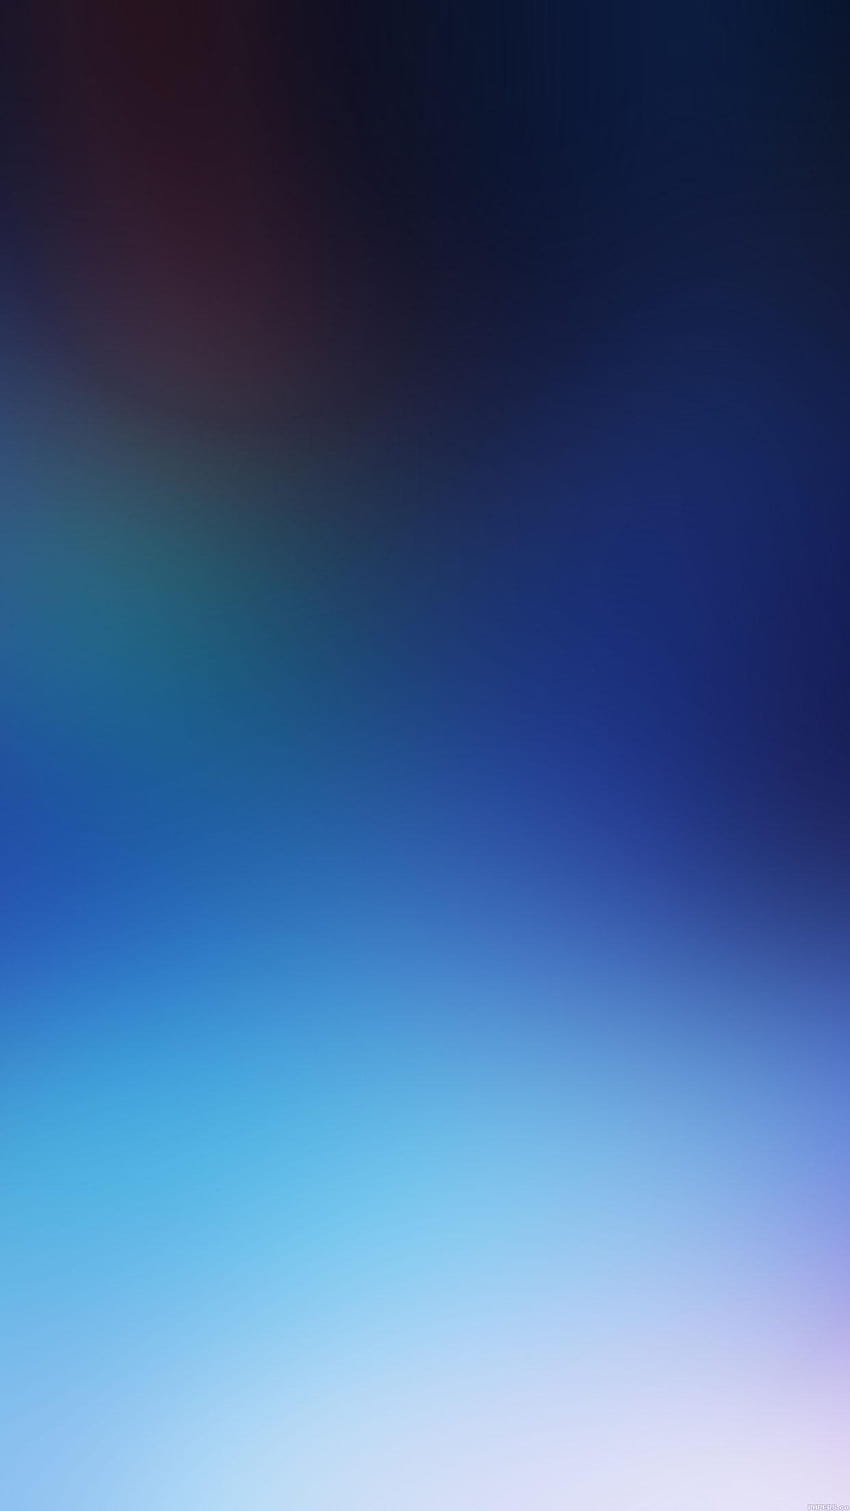 Blur For Android, on, blurred android HD phone wallpaper